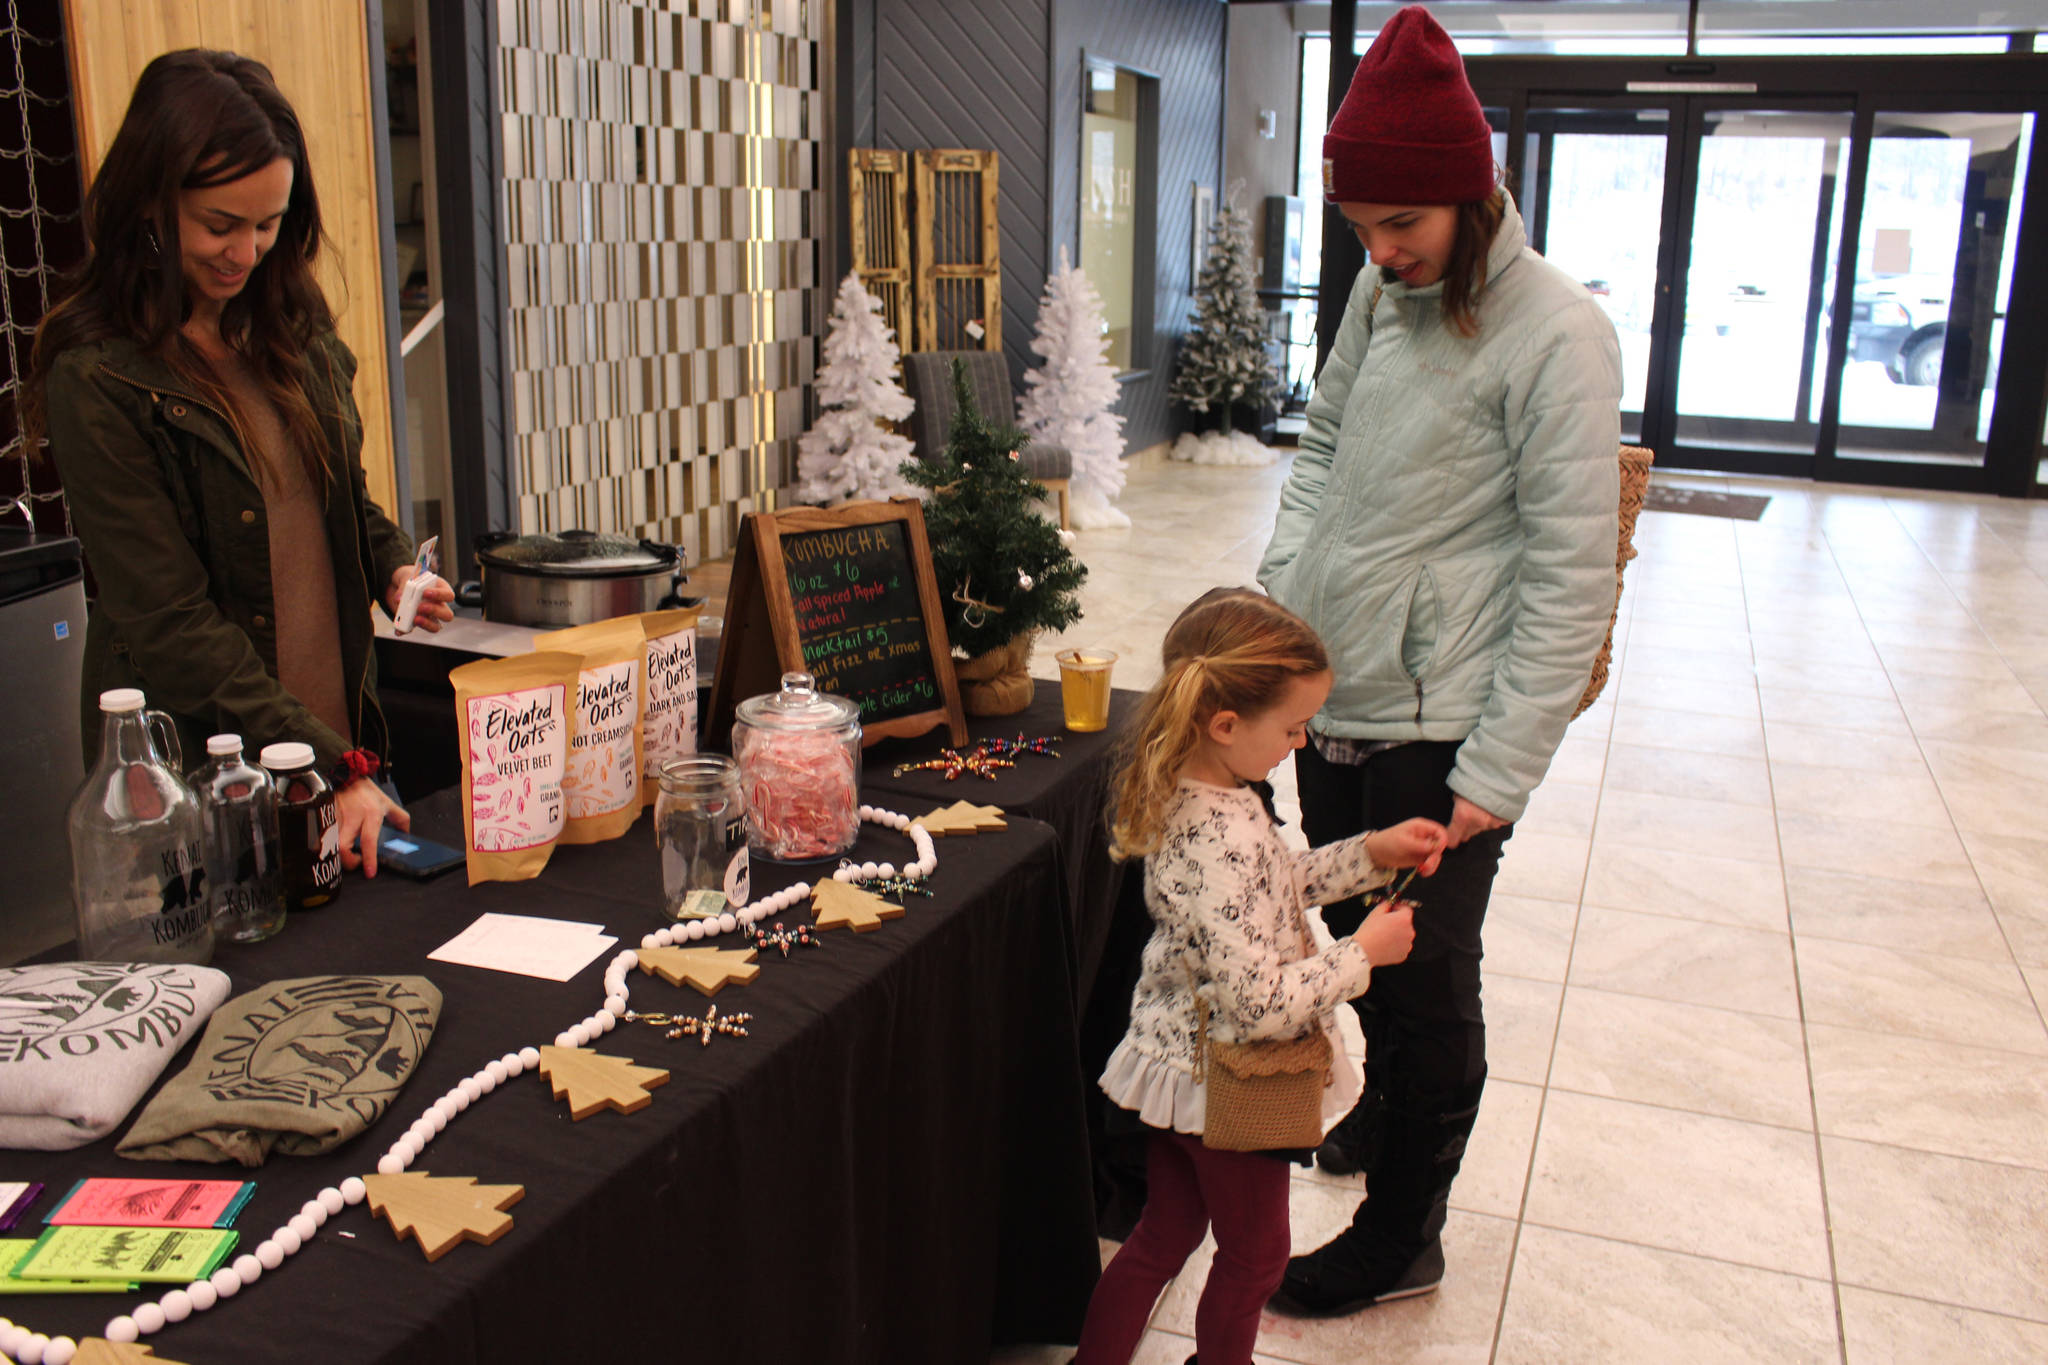 Remmy Rutledge, center, and her mom Breanna Rutledge, right, of Sterling, check out Remmy’s new ornament purchased from Kenai Kombucha owner Devon Gonzales, left, during the Merry Little Christmas Market at the Peninsula Center Mall in Soldotna, Alaska, on Nov. 7, 2020. (Photo by Brian Mazurek/Peninsula Clarion)